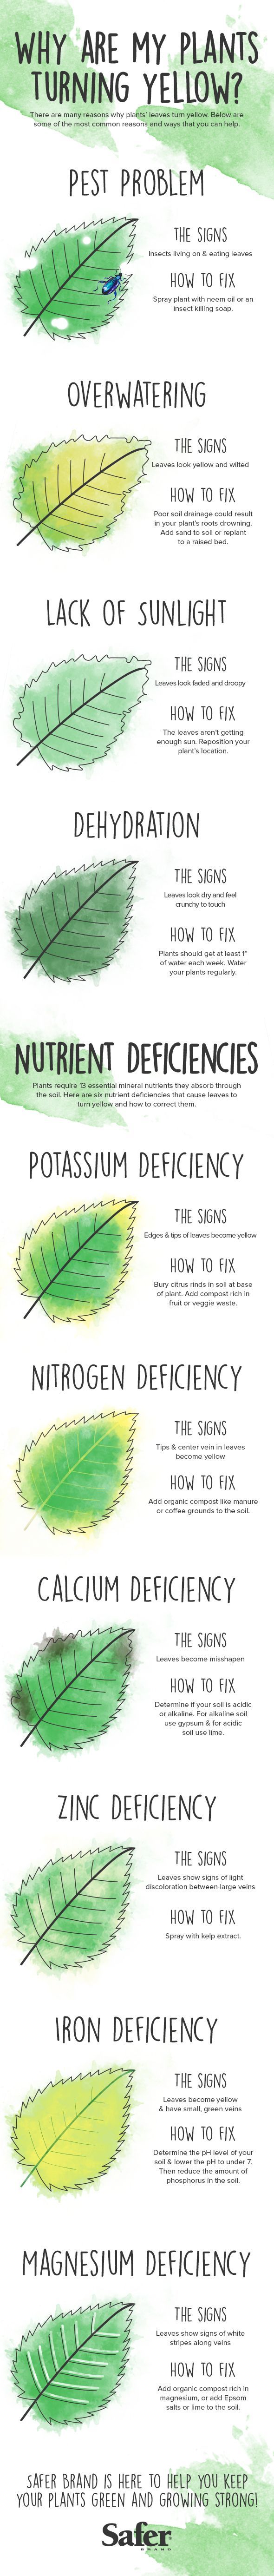 Why do plants turn yellow and how to fix it – Imgur